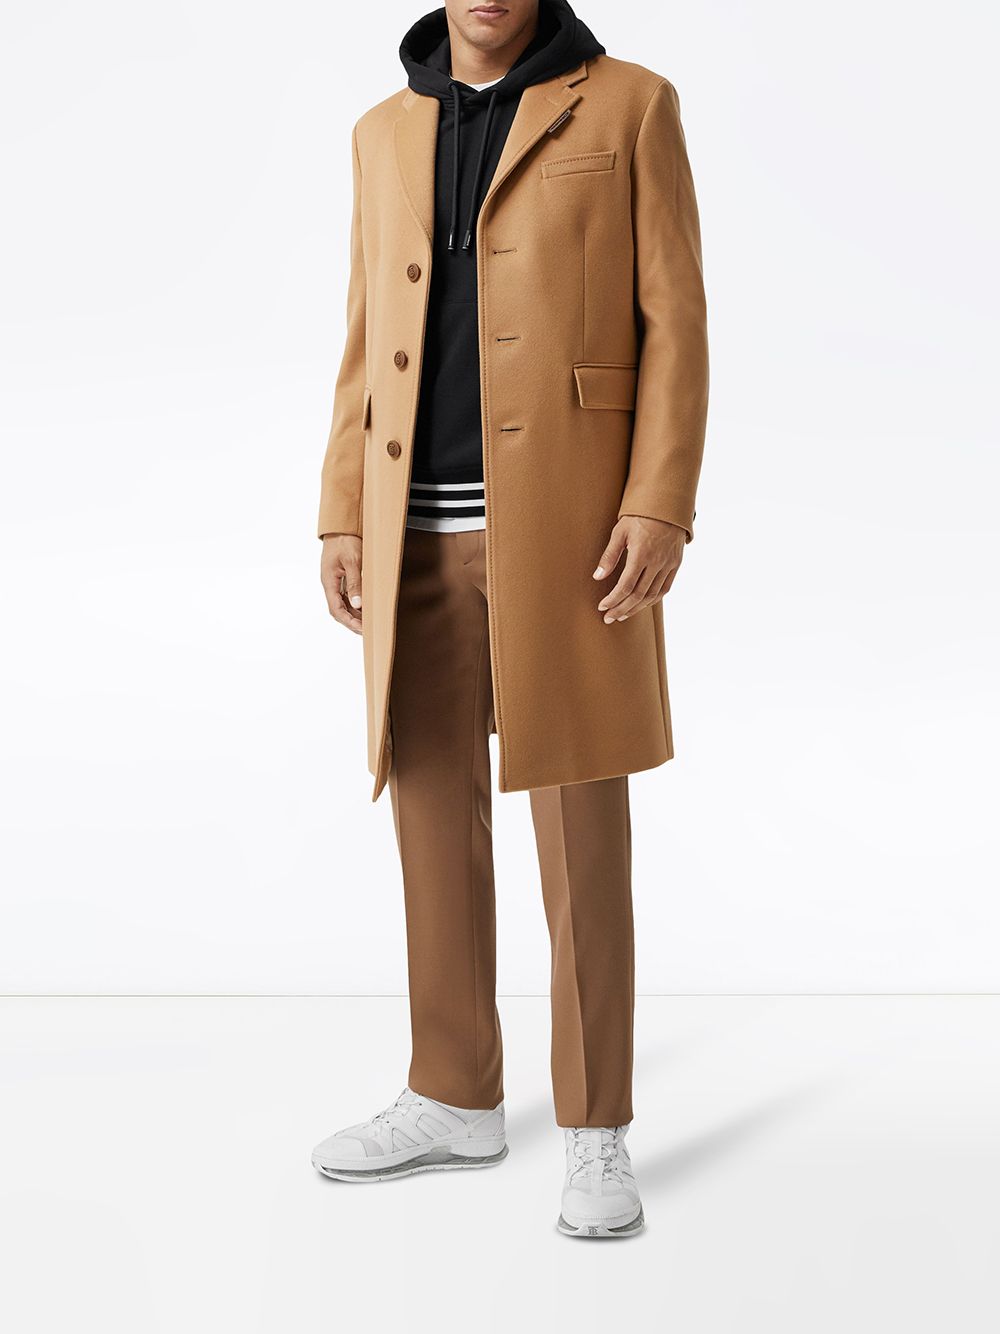 Burberry brown single-breasted tailored coat for men | 8034190 at  Farfetch.com